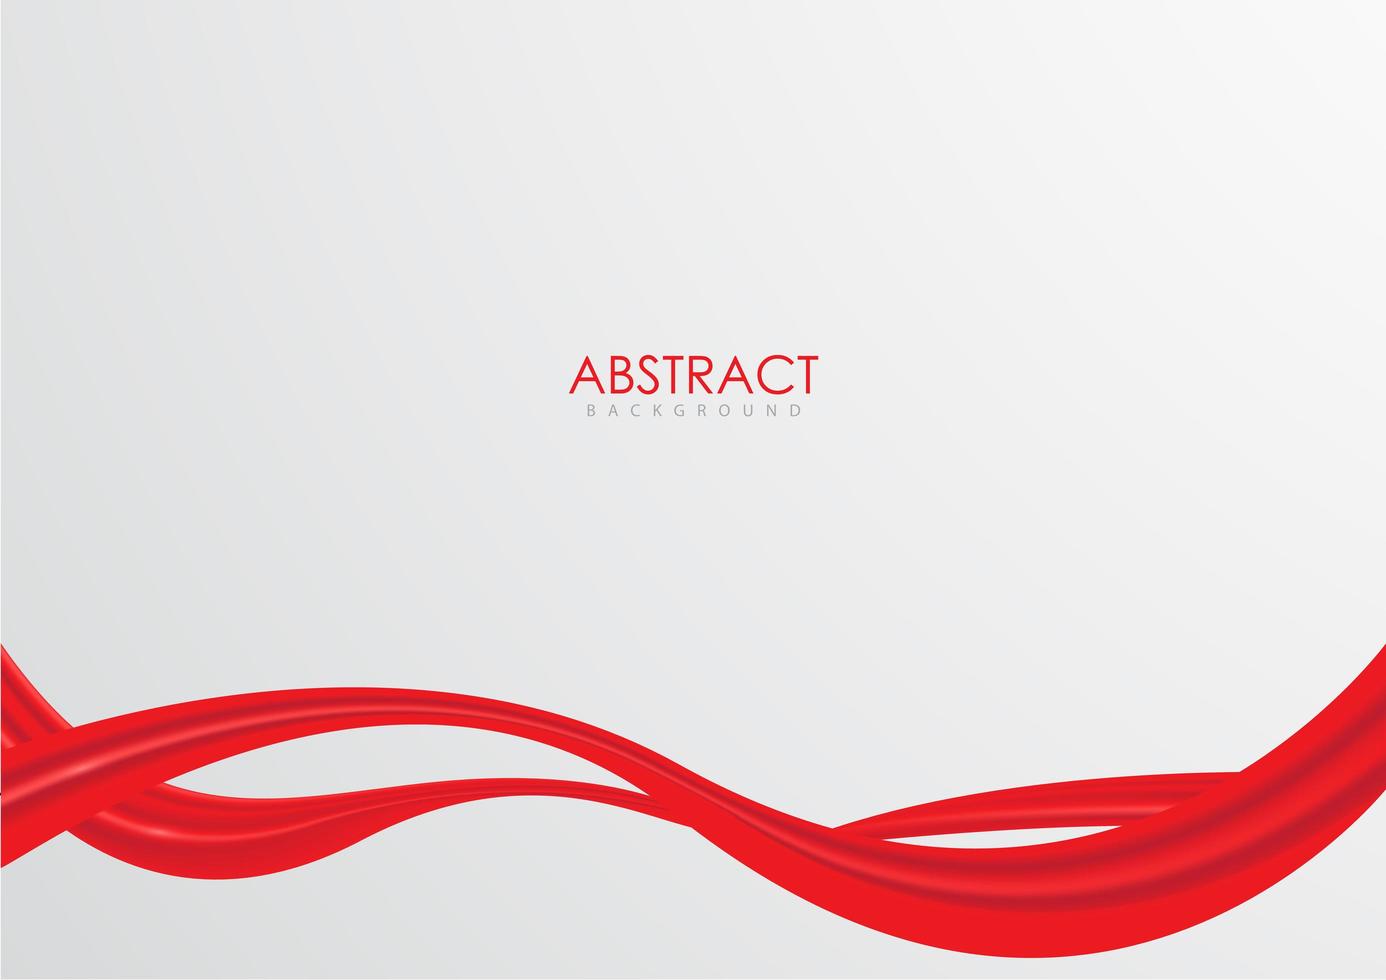 Abstract background with red ribbon vector